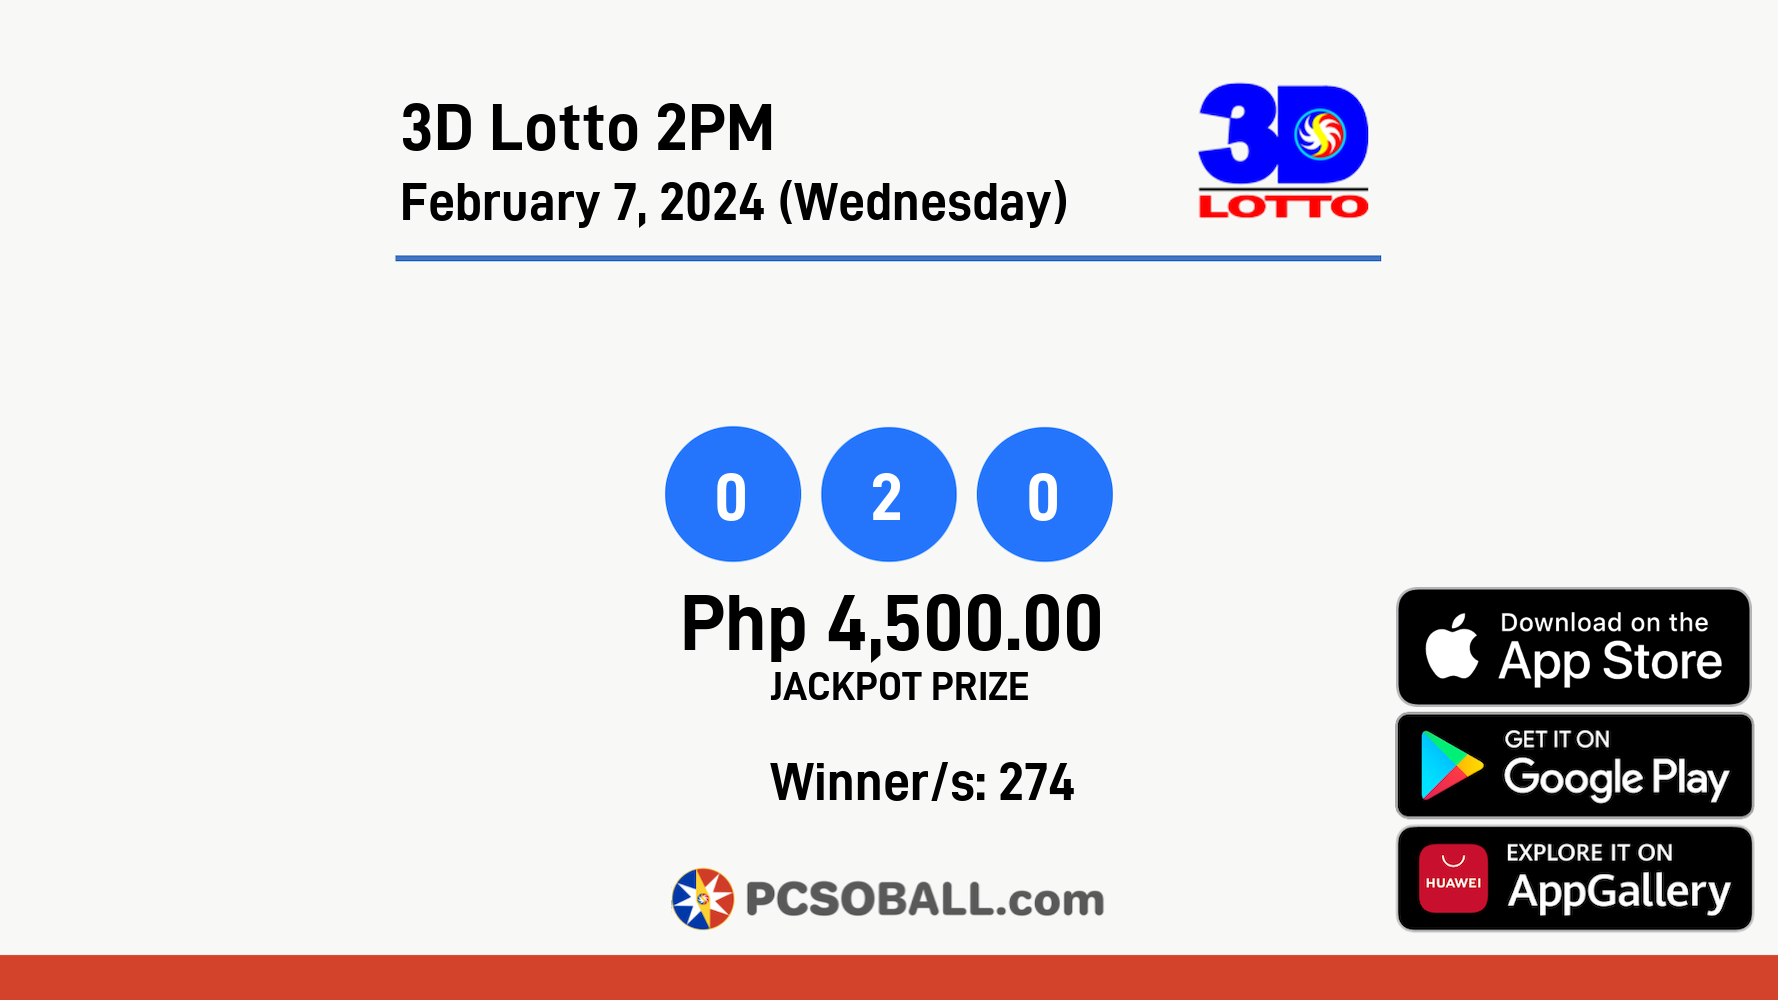 3D Lotto 2PM February 7, 2024 (Wednesday) Result